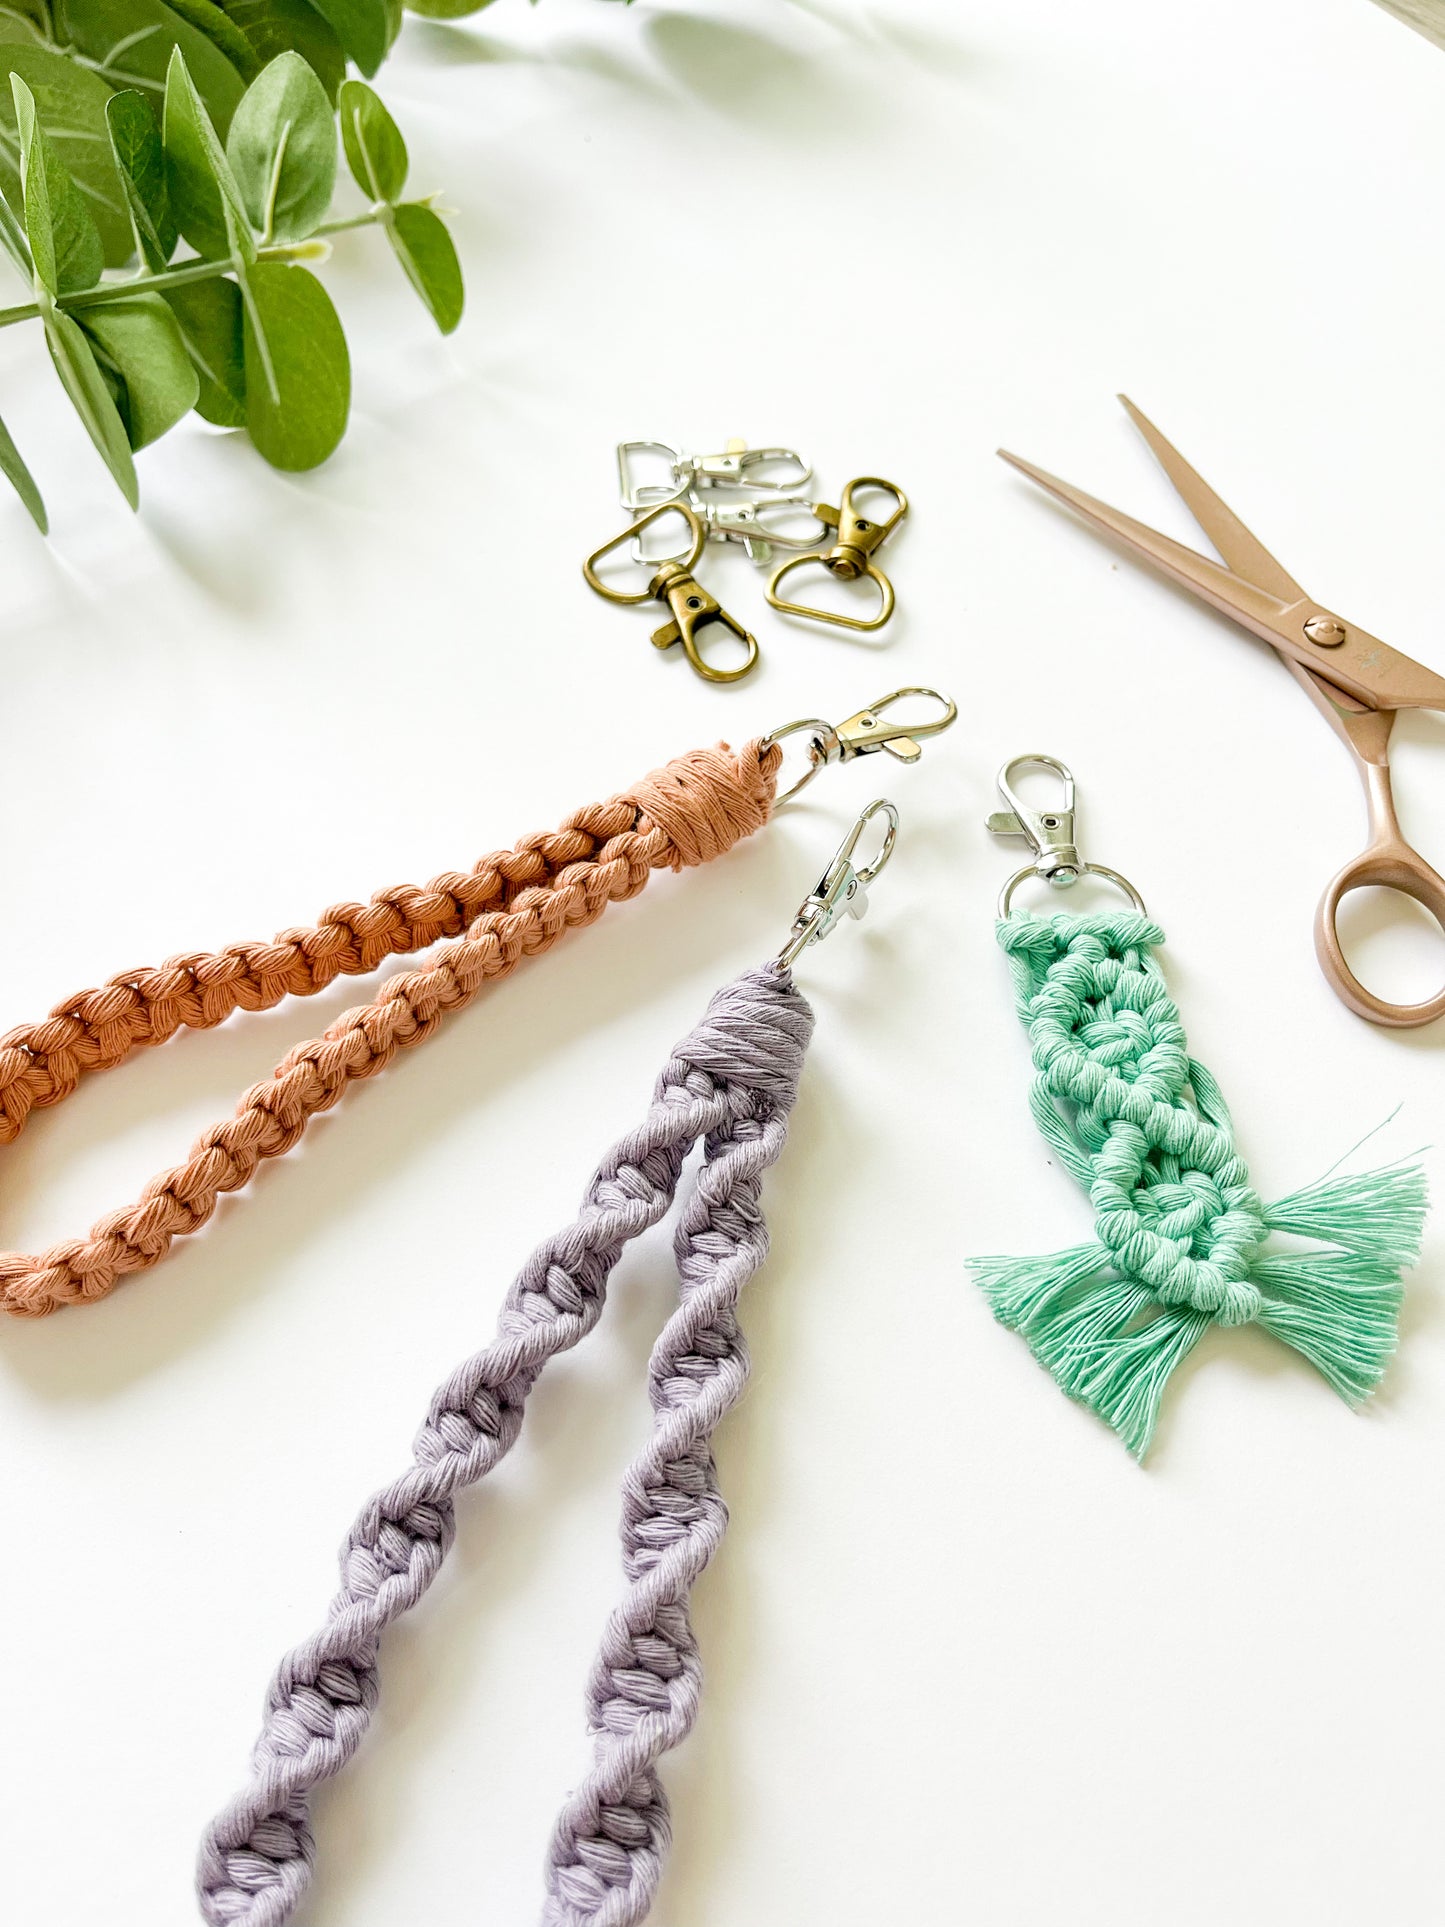 Keychain and Wristlet Workshop - Sunday, April 30th, 10am-12pm